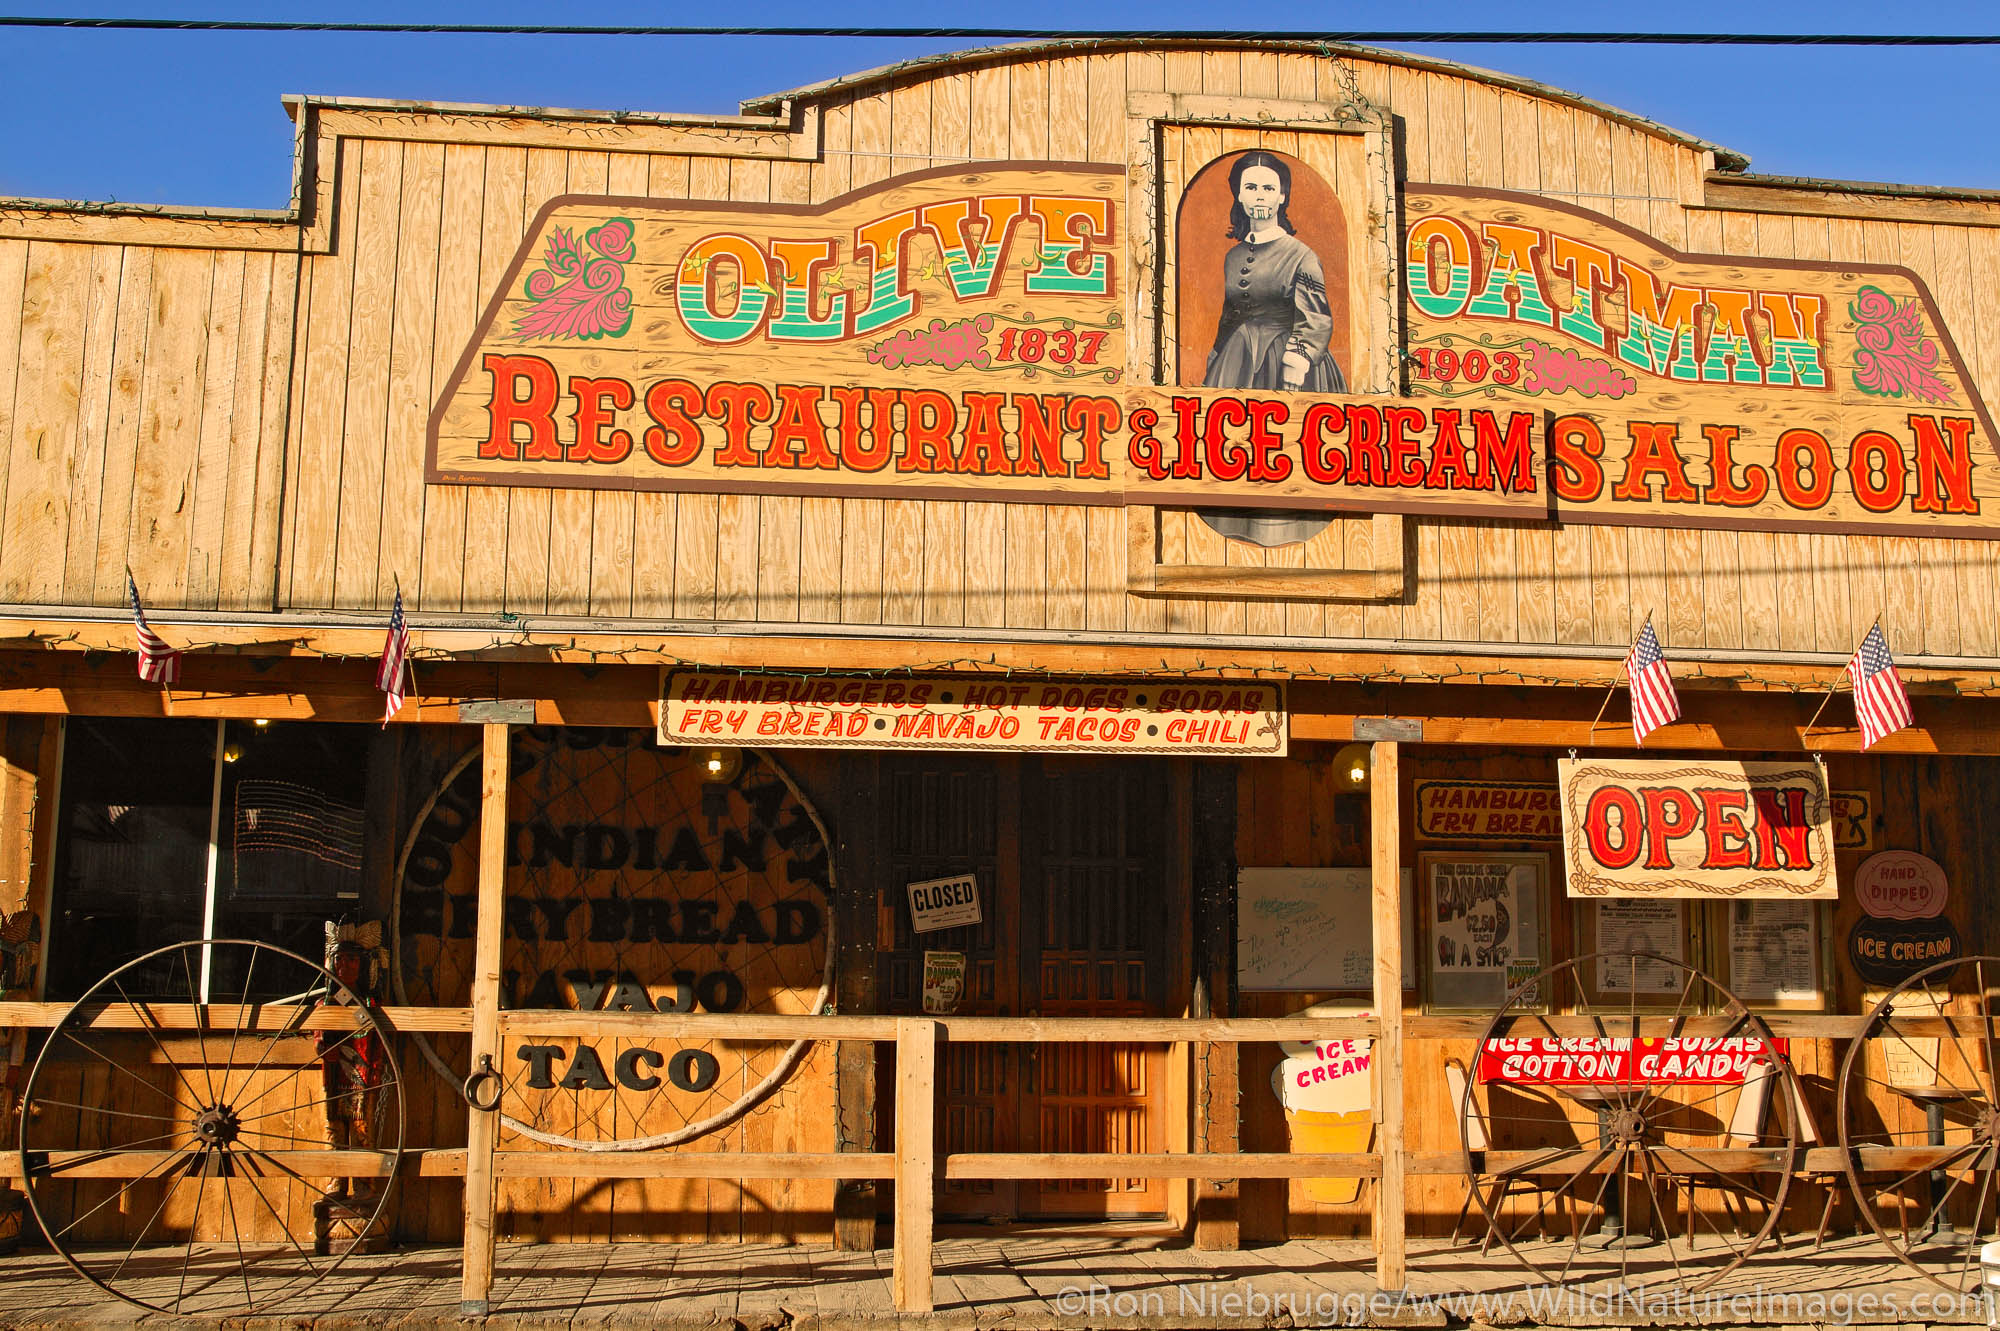 The Olive Oatman Restaurant and Saloon, Historic Route 66, and the town Oatman, Arizona.